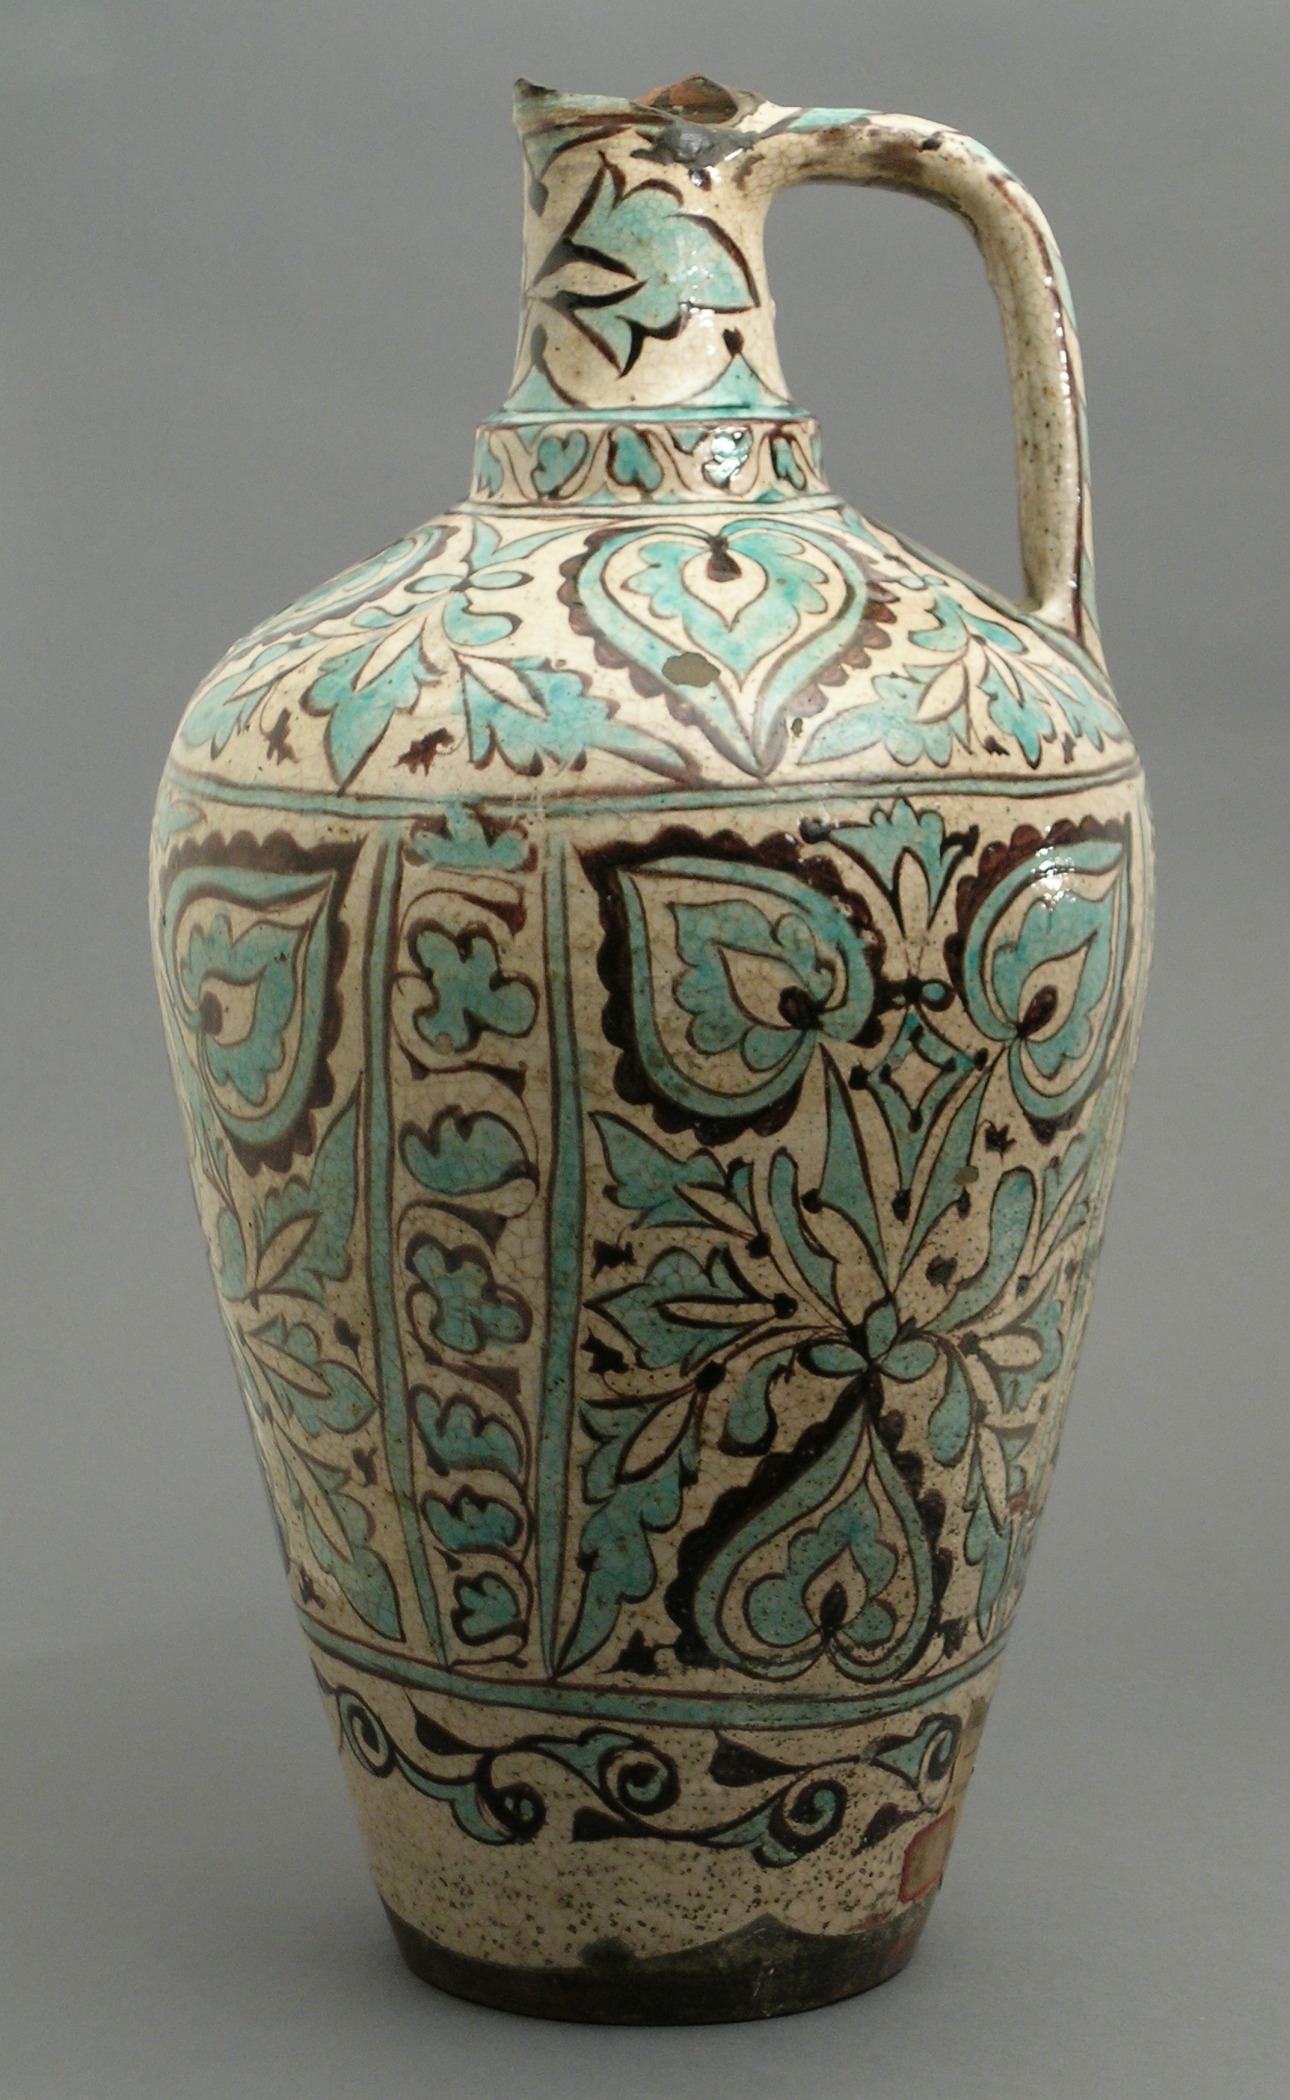 a vase is painted with ornate design on it